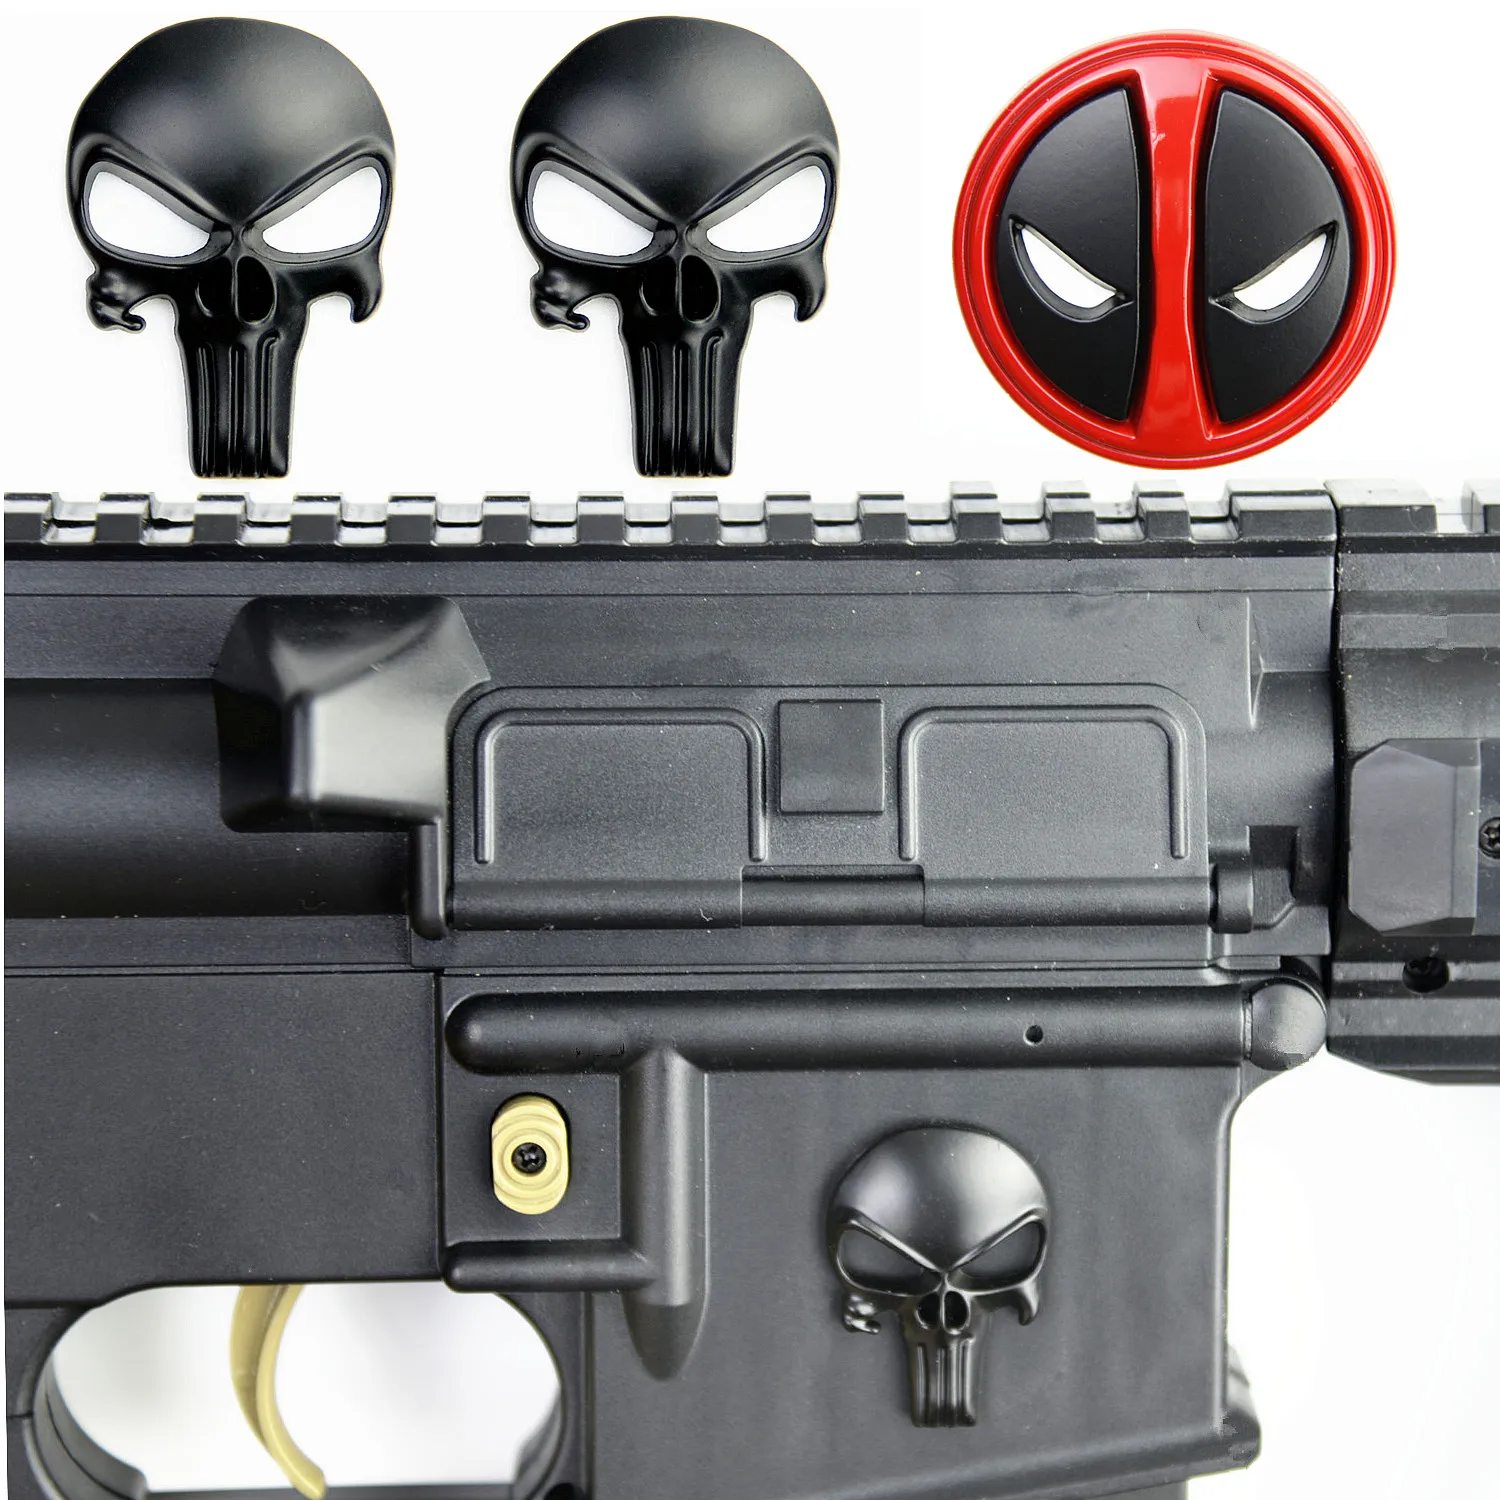 

3D Punisher Skull Deadpool Magwell Metal Badge Decal Sticker for AR15 AK47 M4 M16 Airsoft Rifle Pistol Gun Hunting Accessories